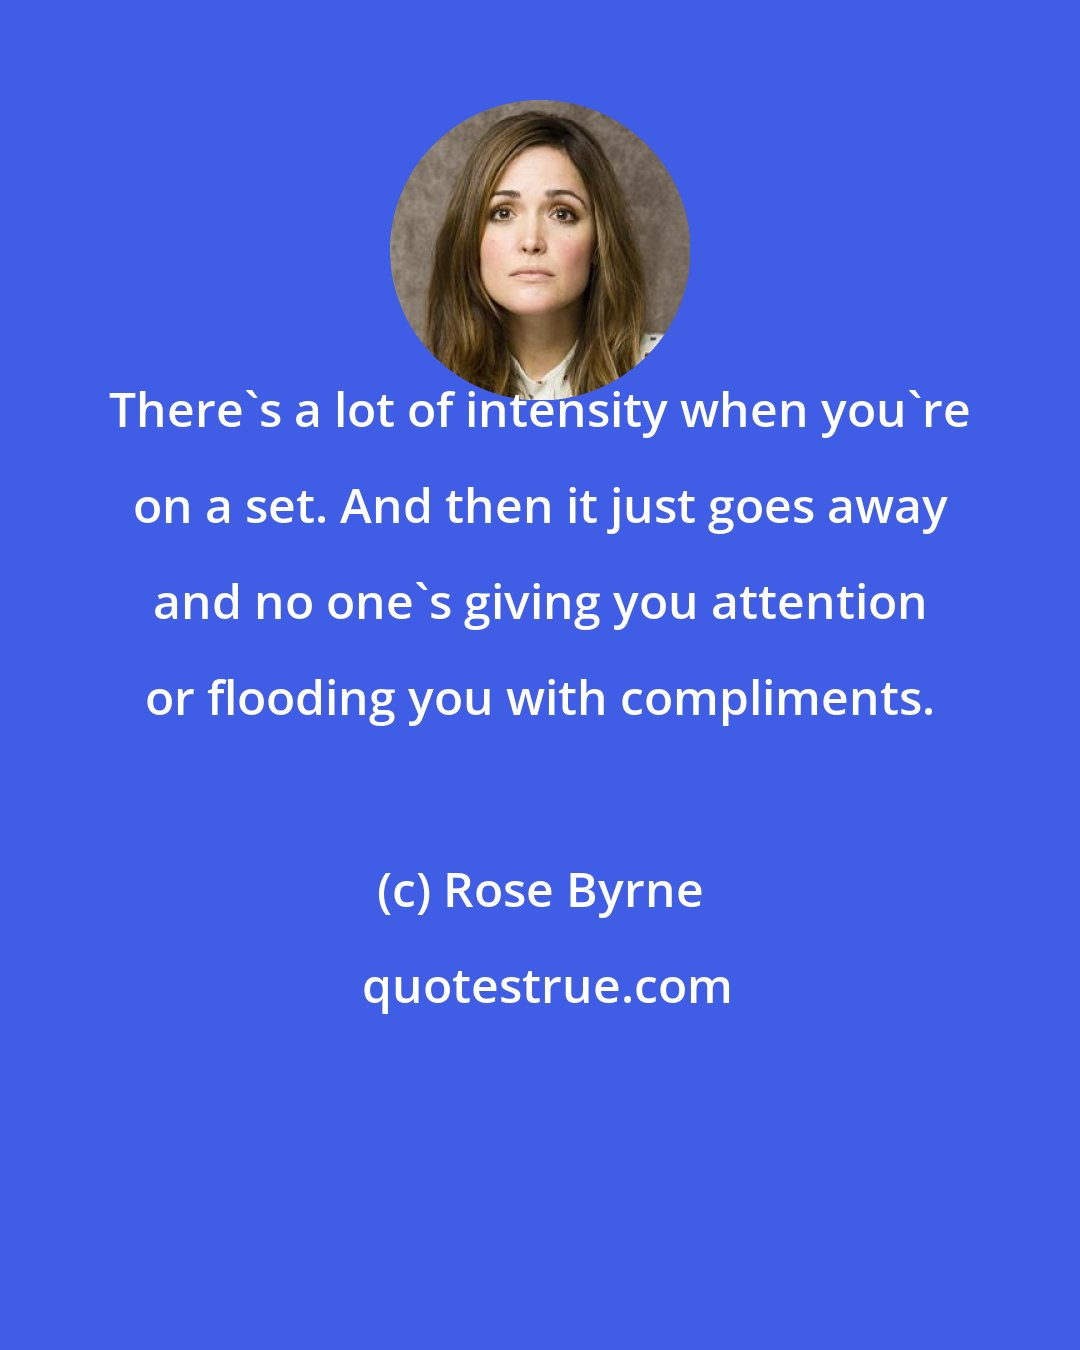 Rose Byrne: There's a lot of intensity when you're on a set. And then it just goes away and no one's giving you attention or flooding you with compliments.